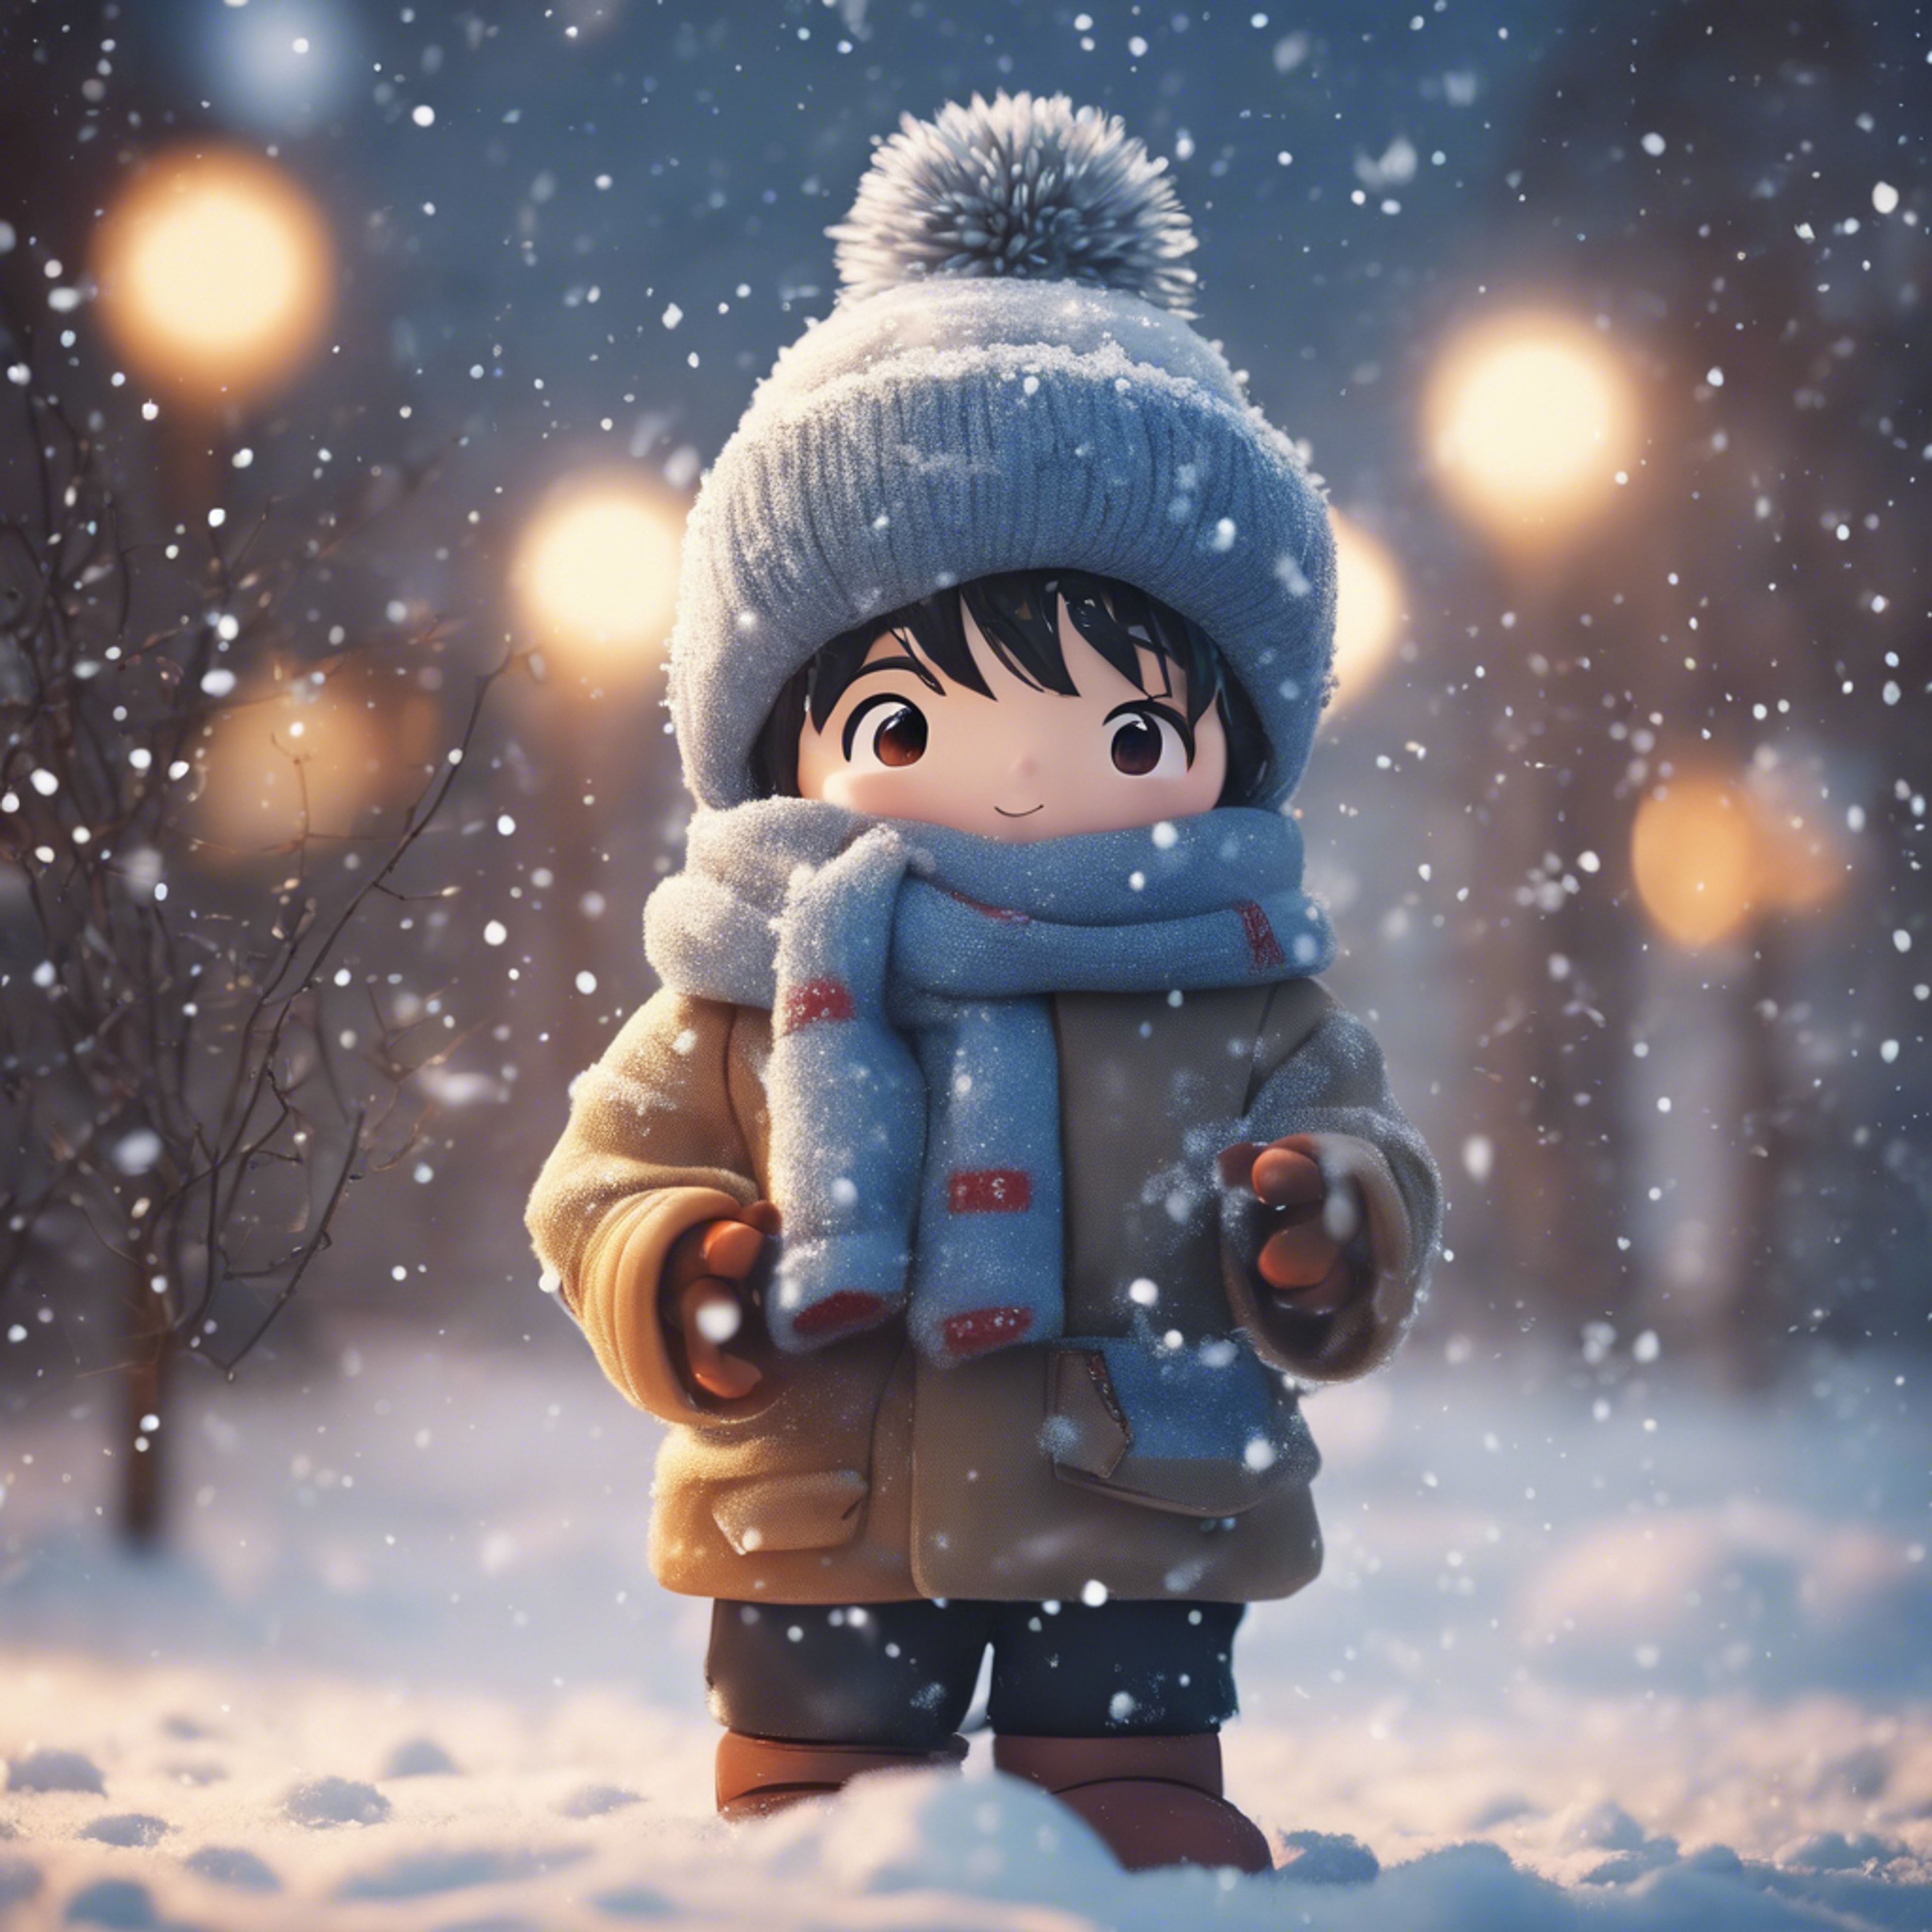 Anime boy wrapped in warm winter clothes, building a playful snowman in the snowfall. 牆紙[d4075dc9b13644f685e7]